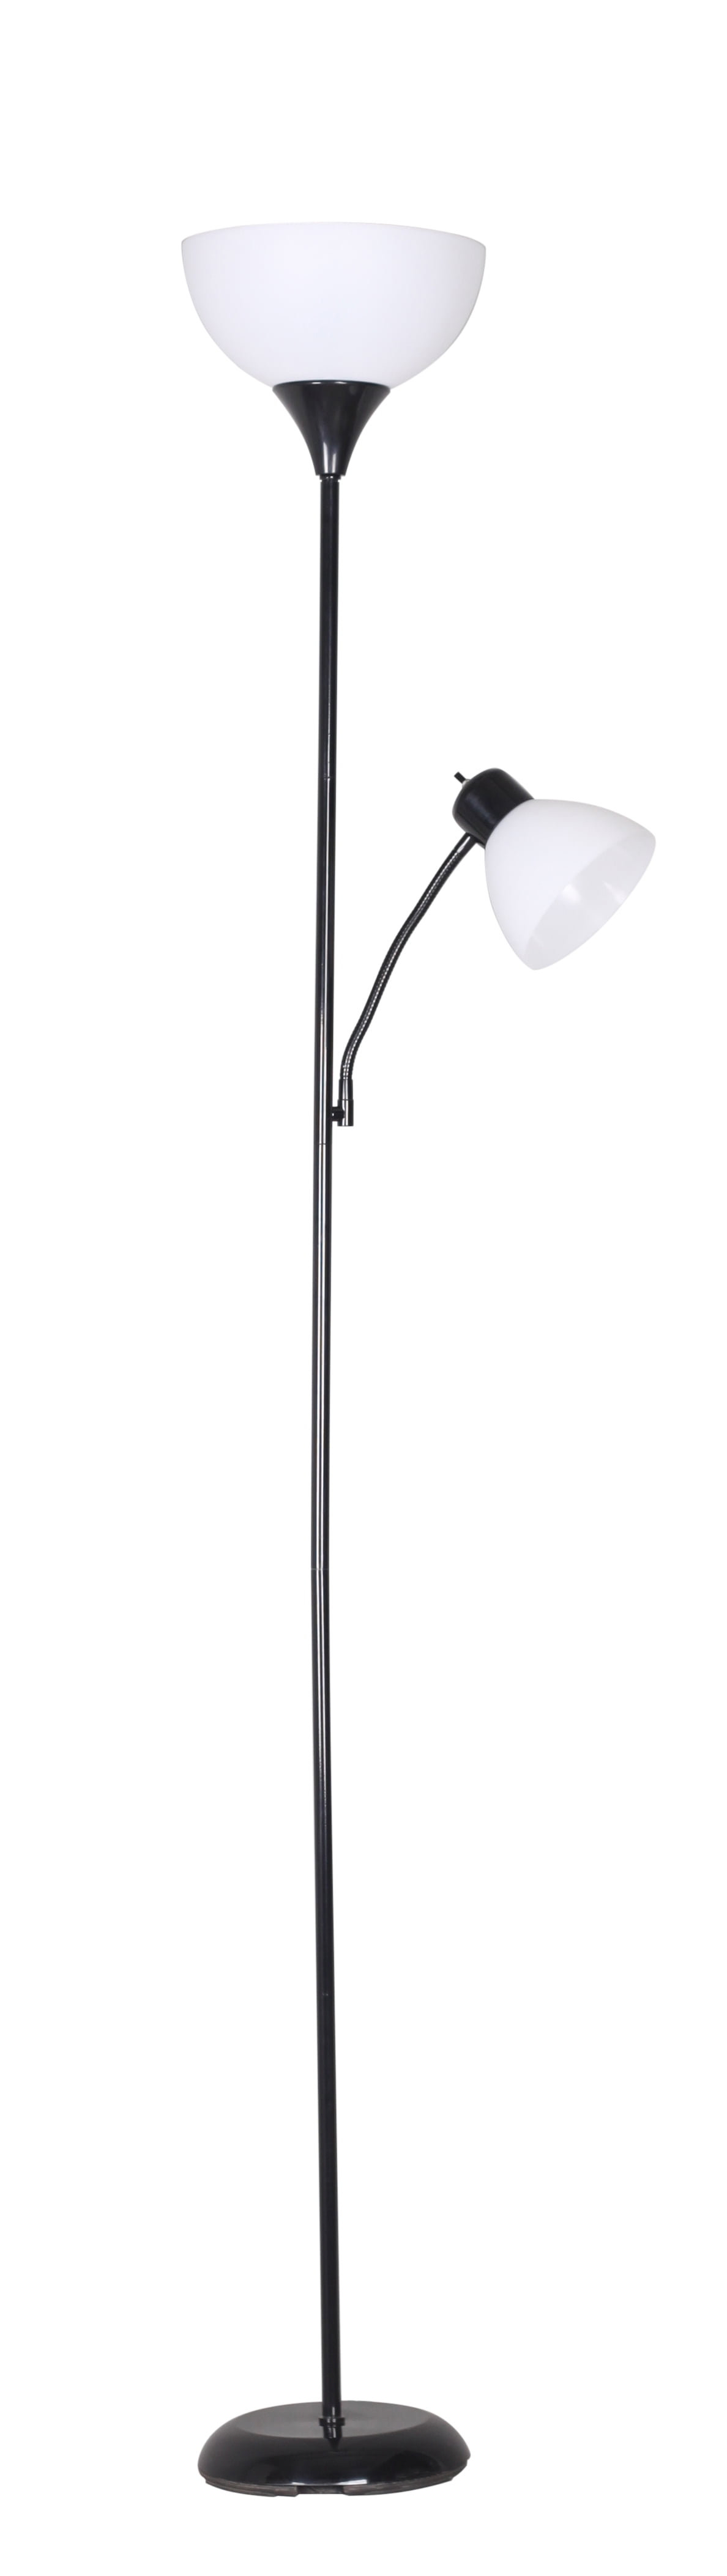 72 Inch Floor Lamp With Additional Adjustable Reading Lamp Combo Lightning Black